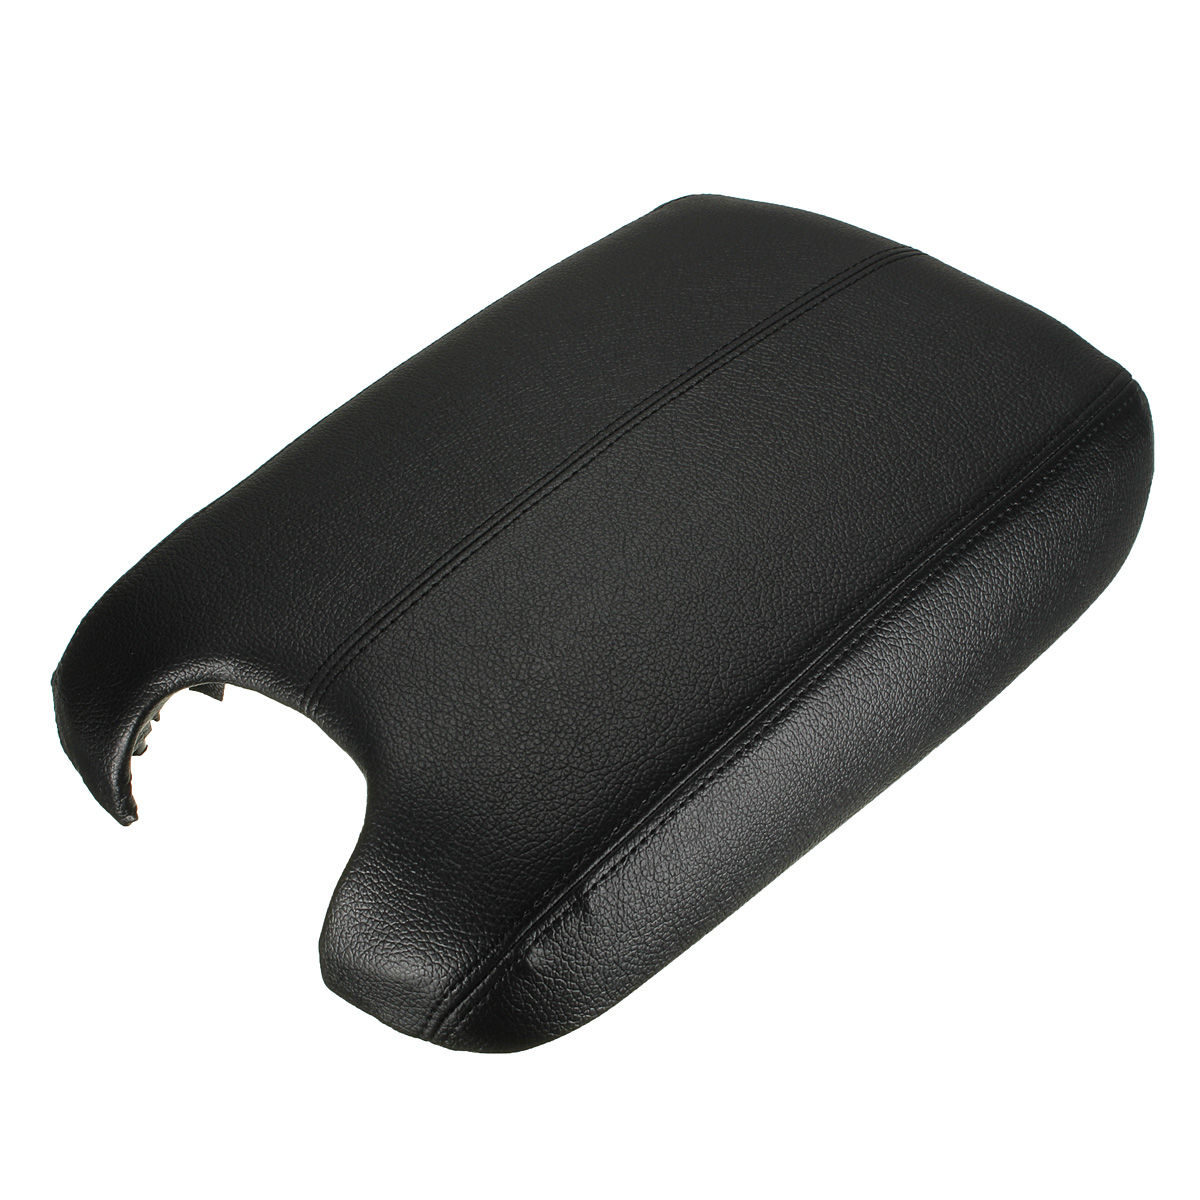 2008 Honda accord console armrest cover #1